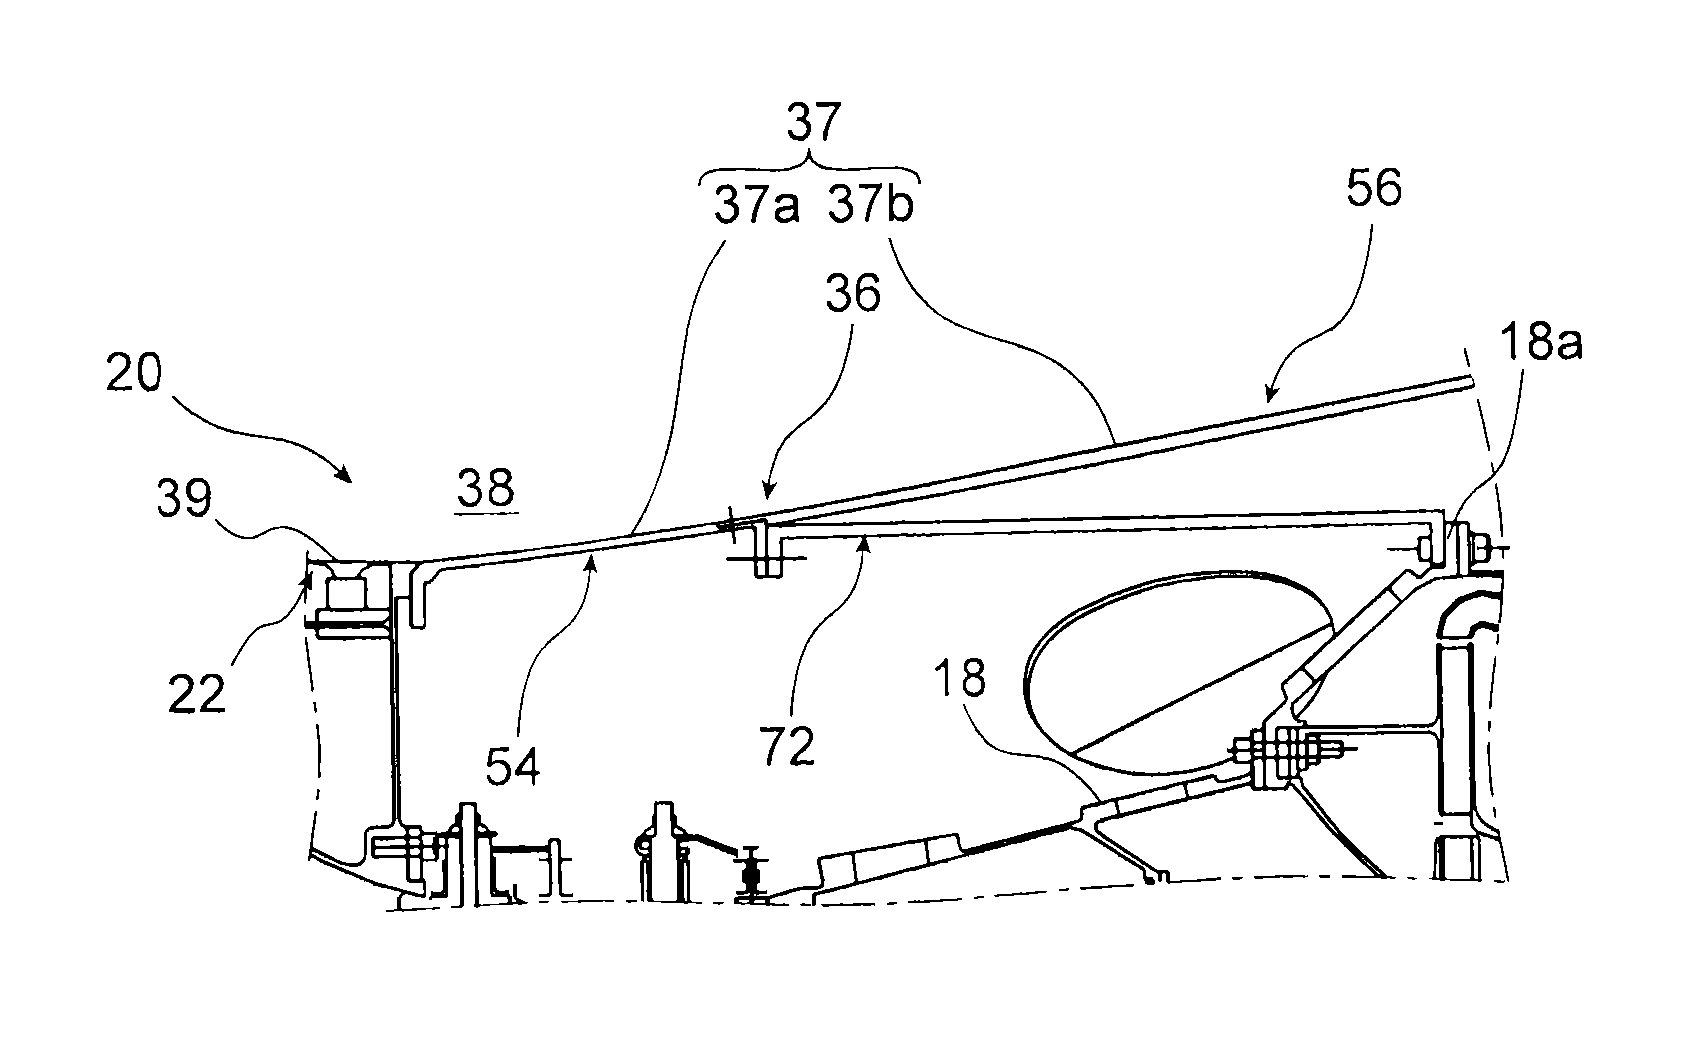 Dual-flow turbomachine for aircraft, including structural means of rigidifying the central casing